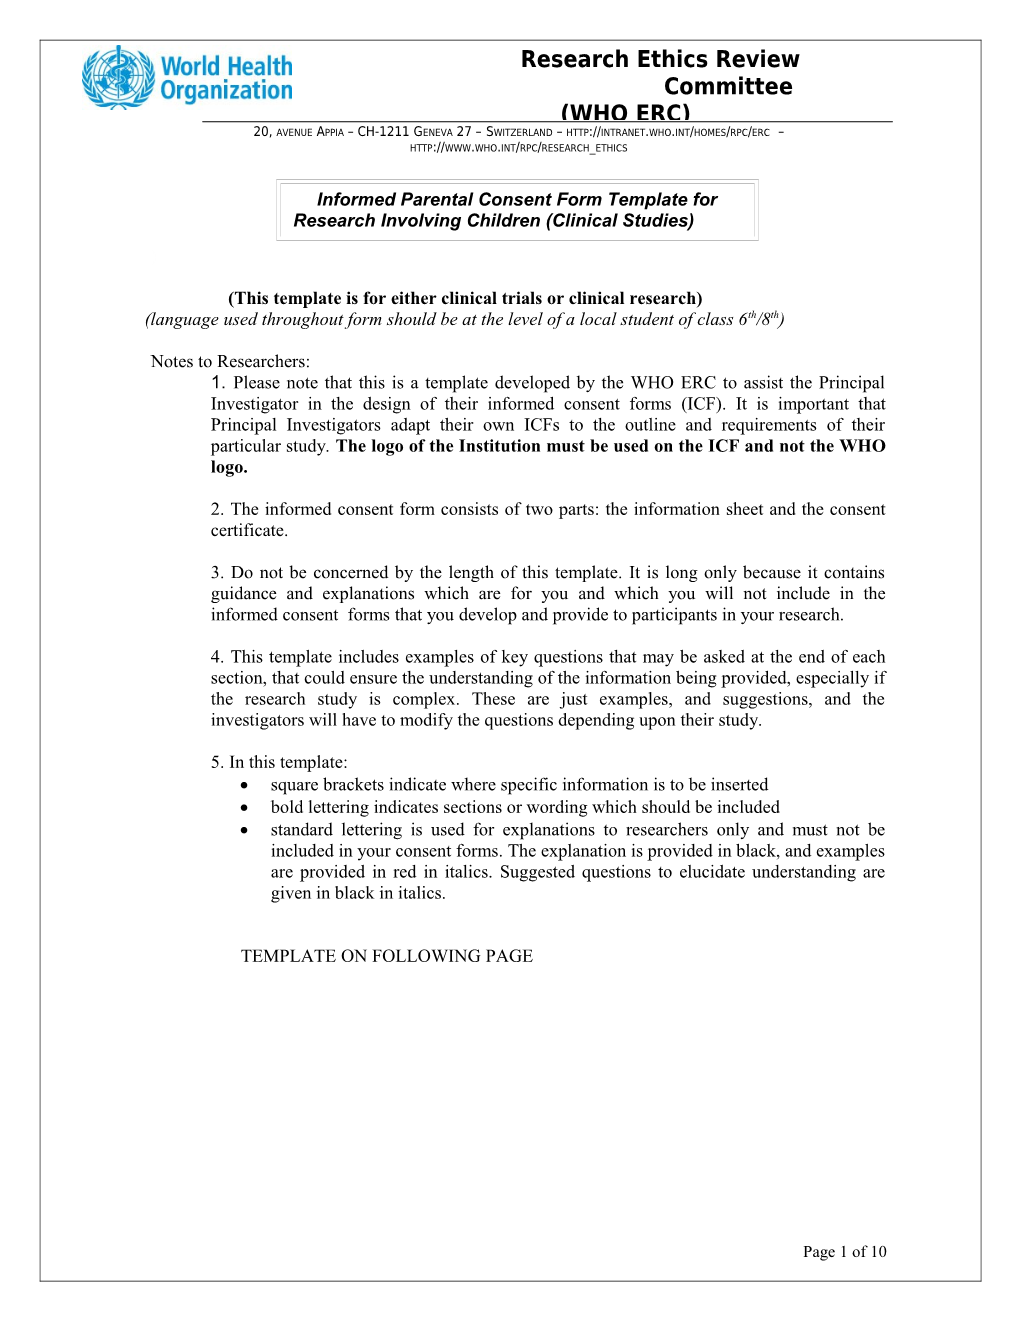 Informed Consent Form Template For Clinical Trials